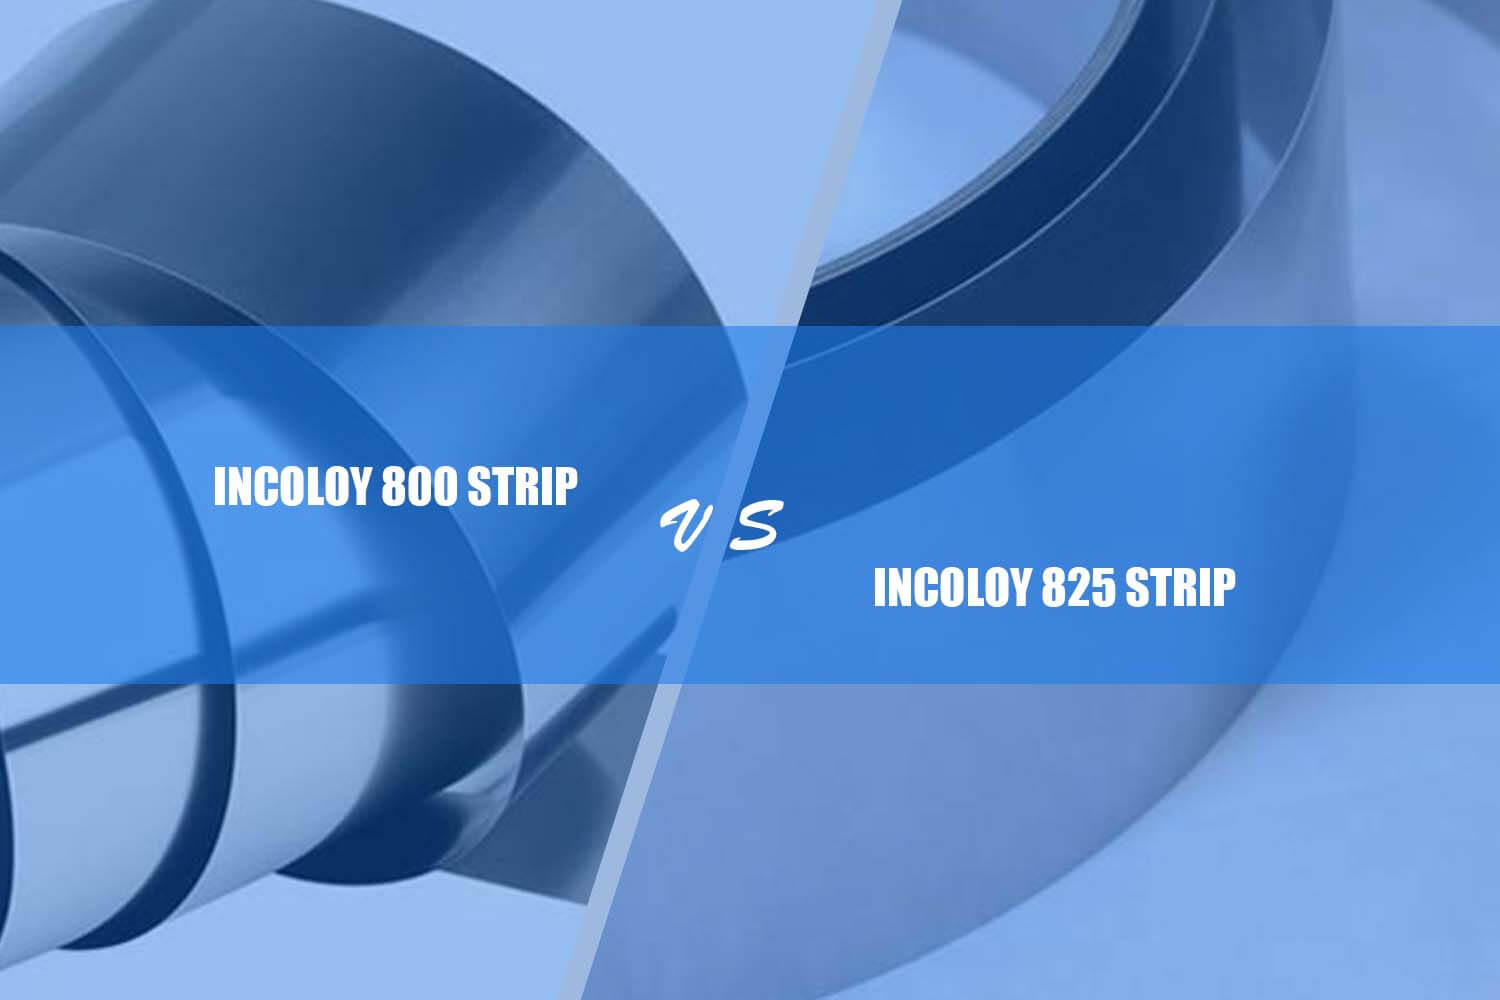 difference between incoloy 800 strip and incoloy 825 strip